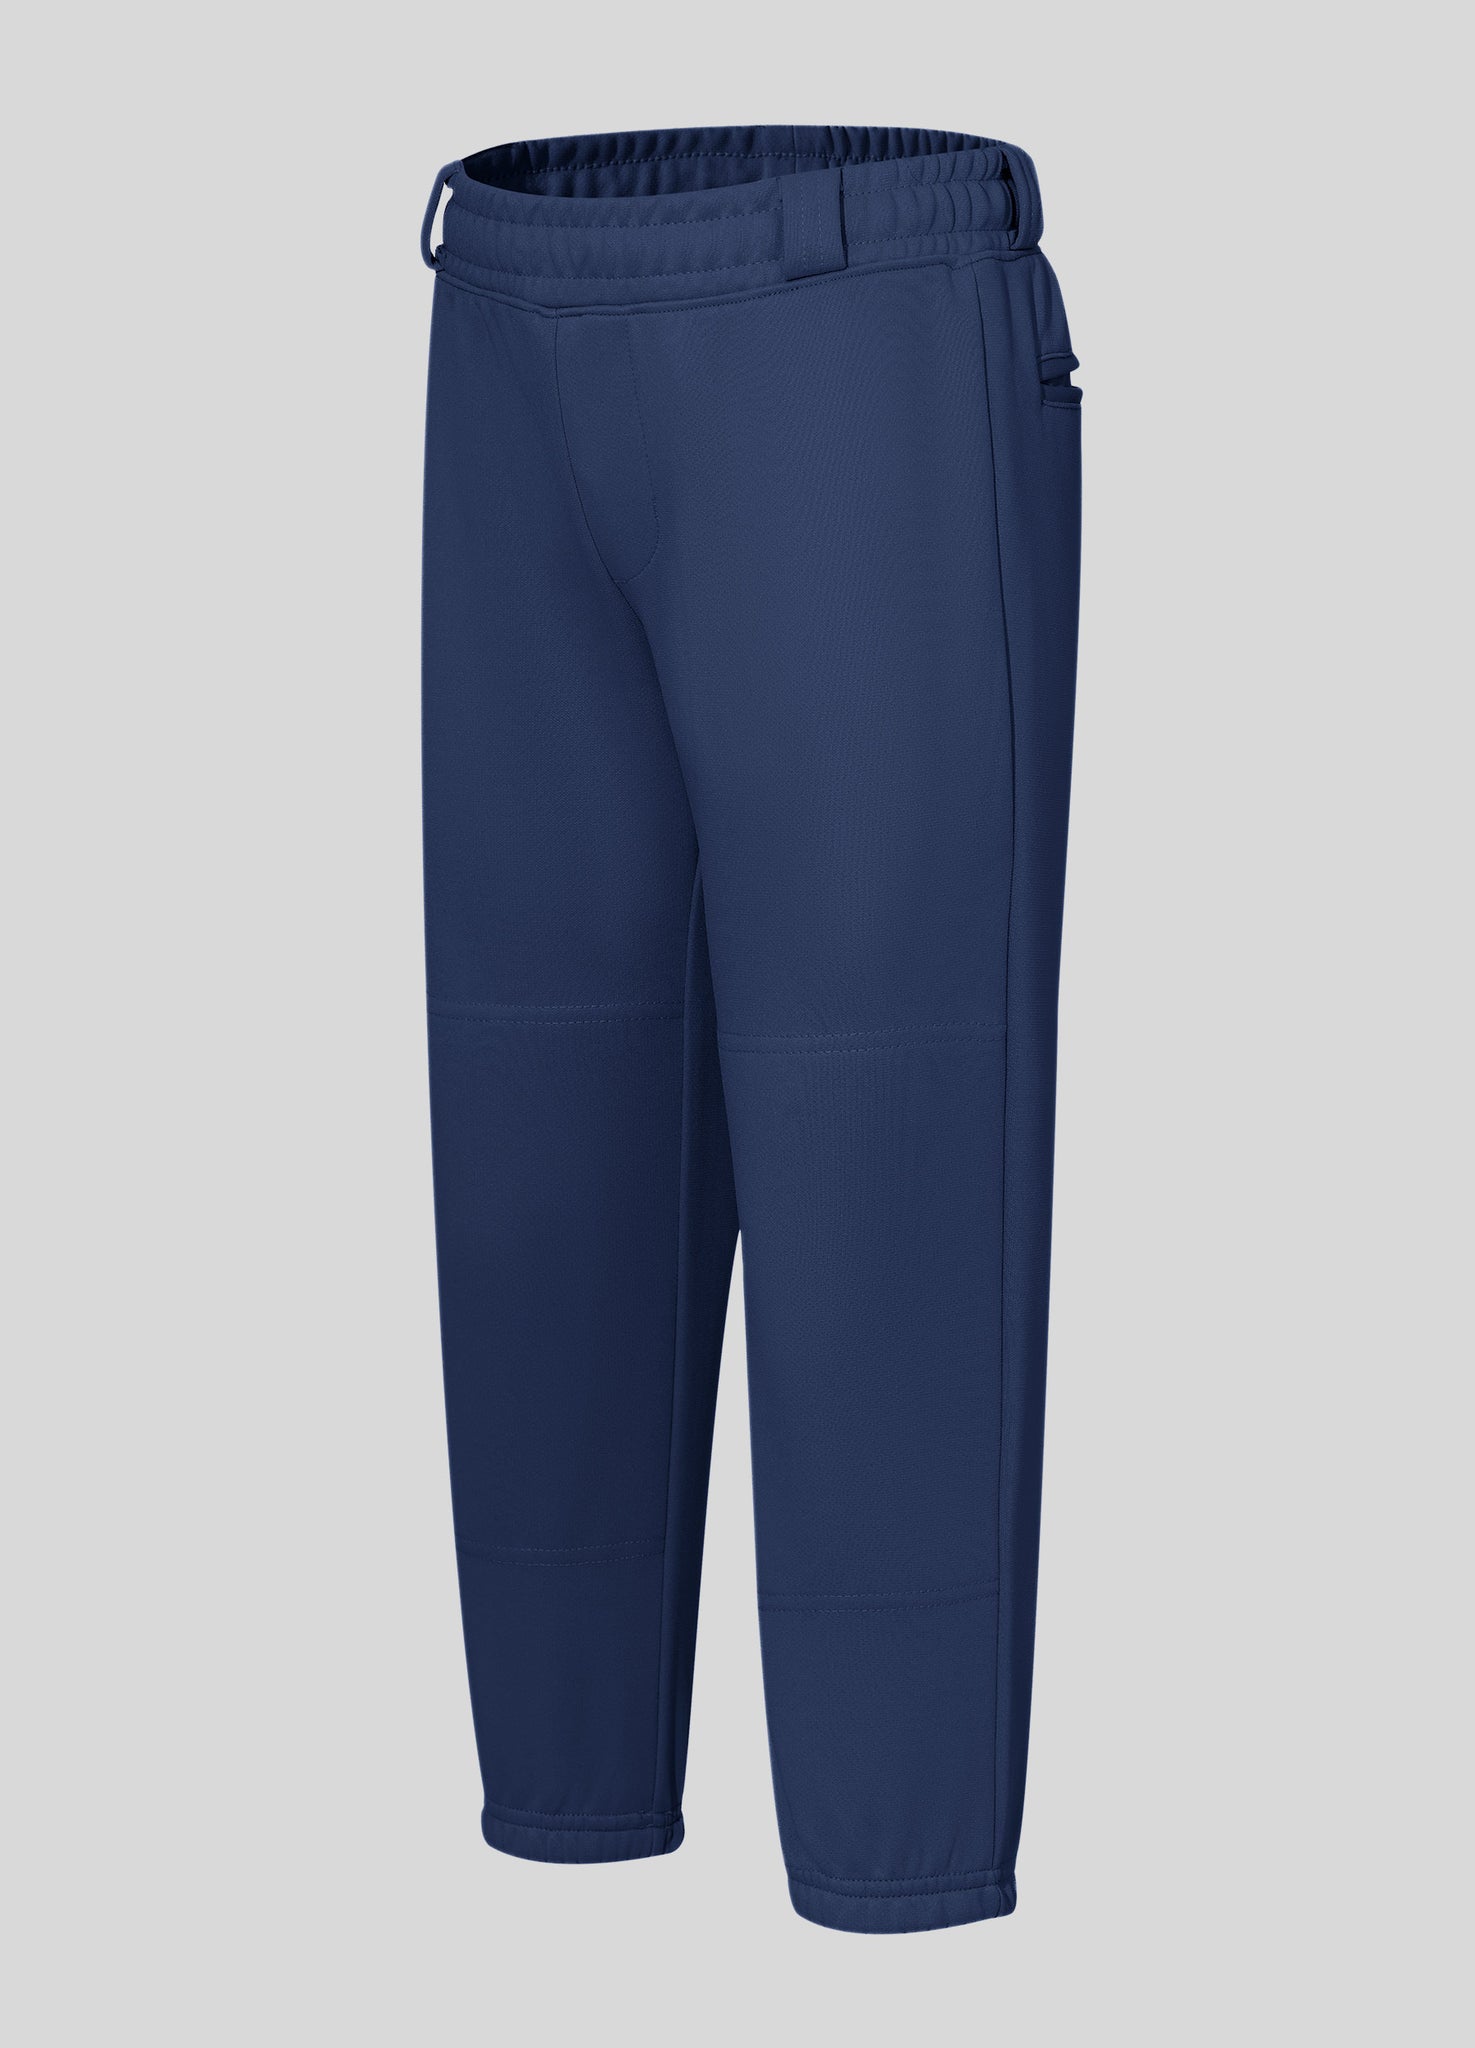 Youth Softball Fastpitch Pants 2T-8T